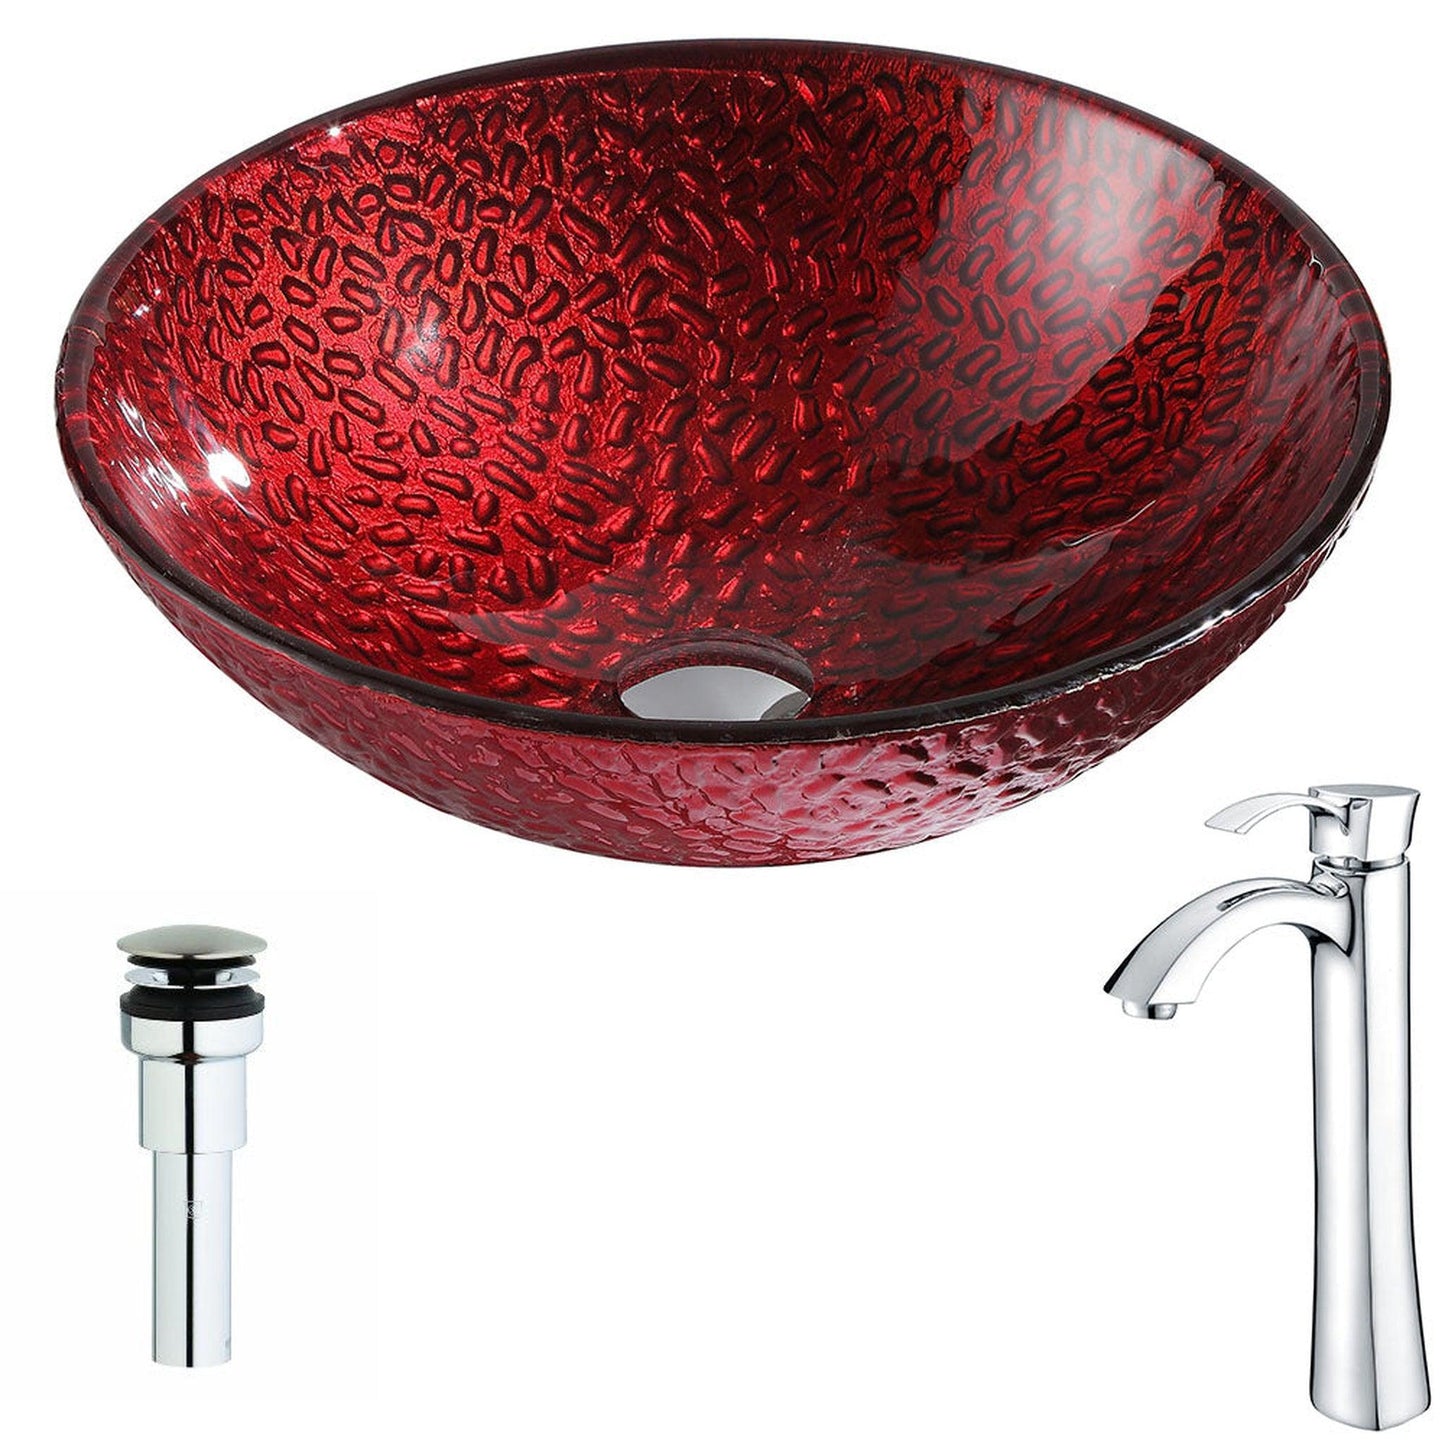 ANZZI Rhythm Series 17" x 17" Round Lustrous Red Deco-Glass Vessel Sink With Polished Chrome Pop-Up Drain and Brushed Nickel Enti Faucet